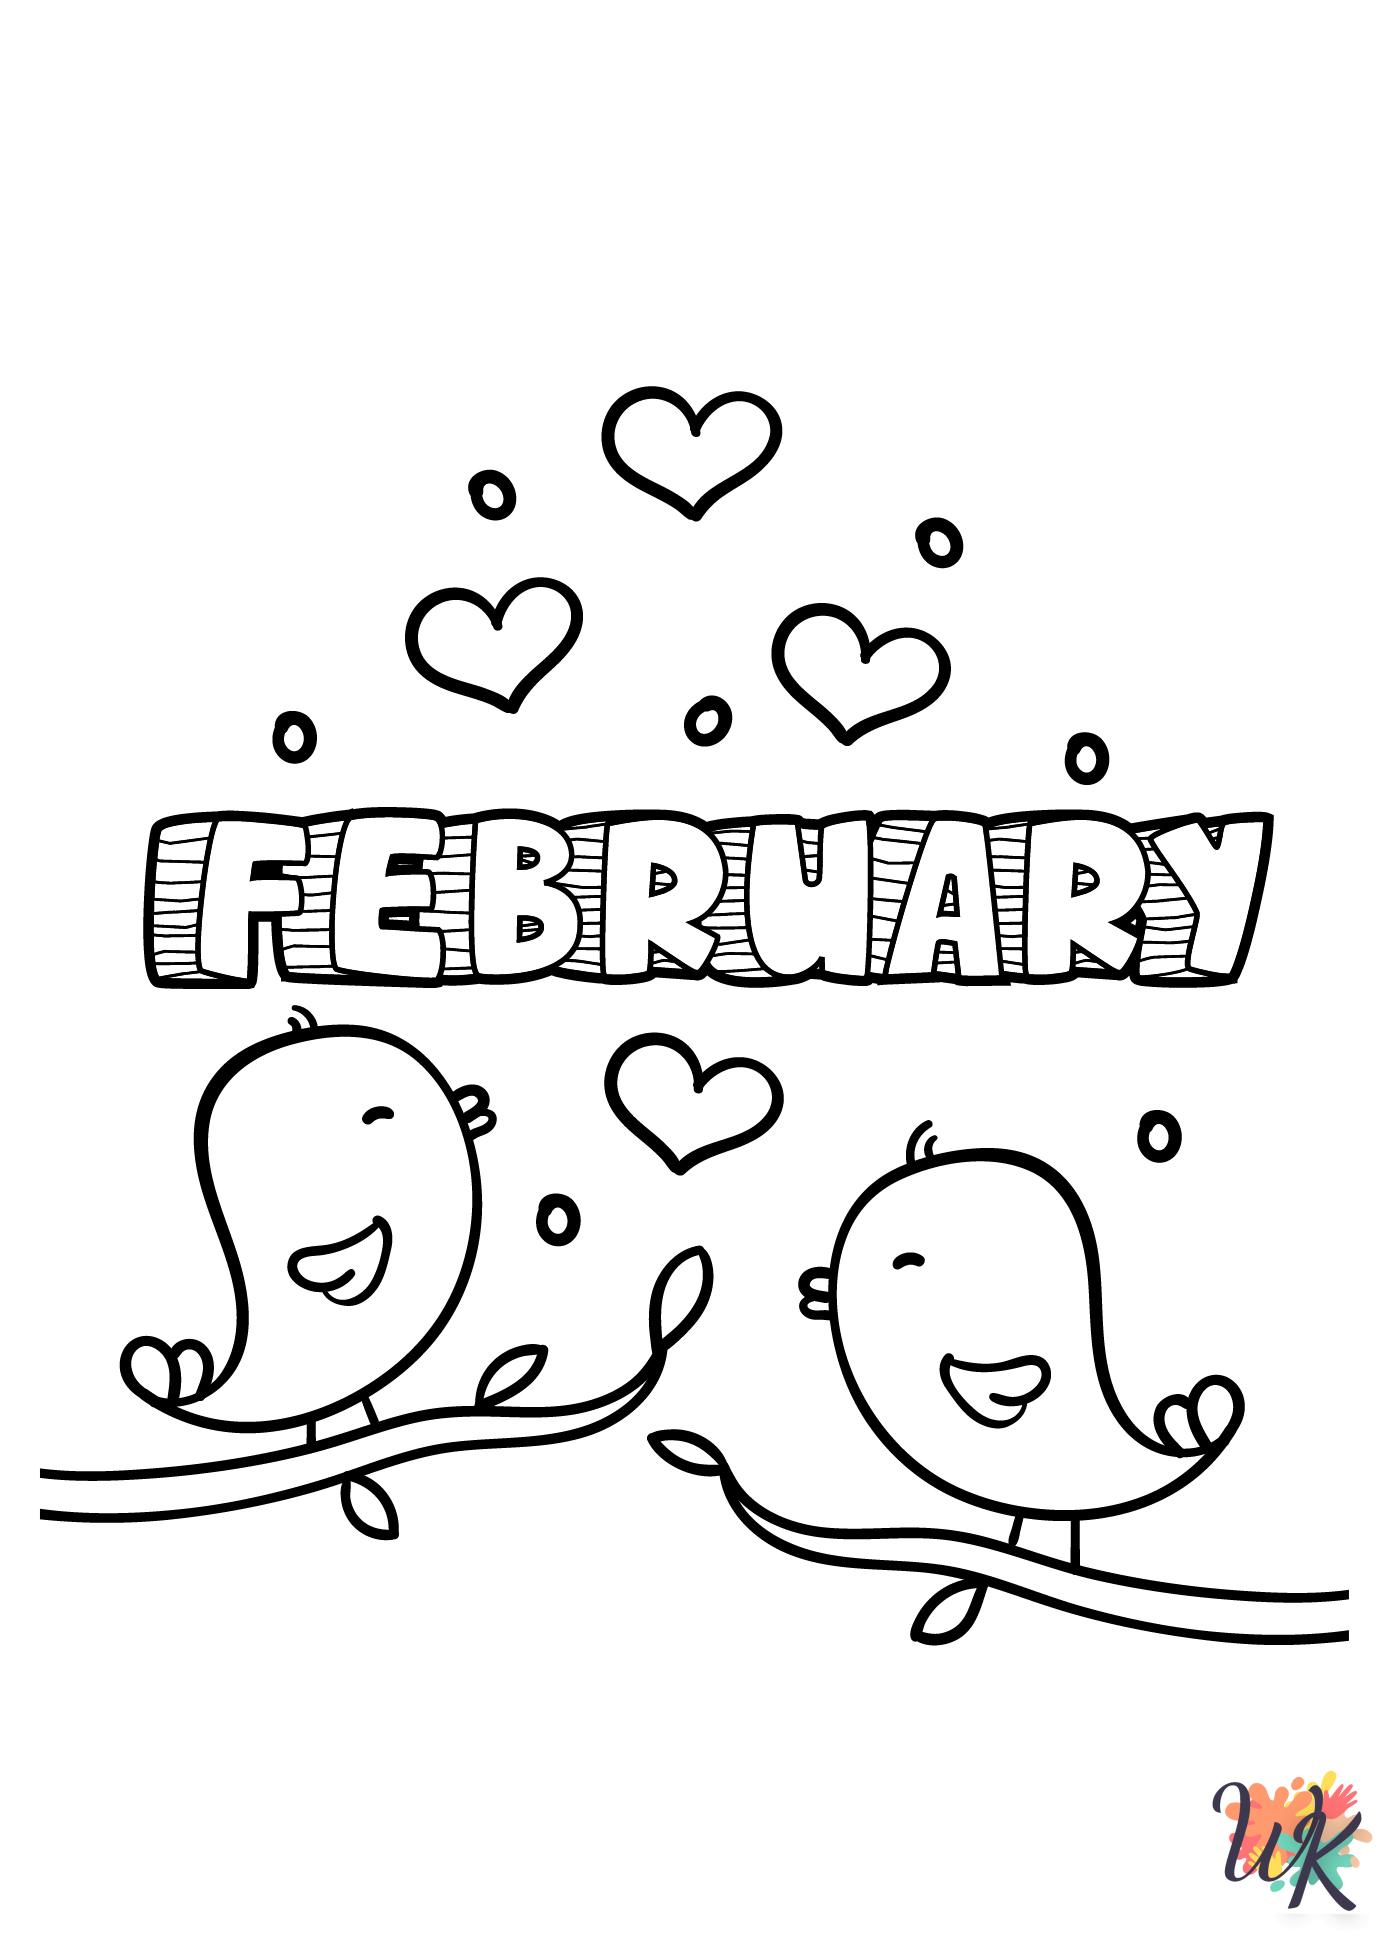 February printable coloring pages